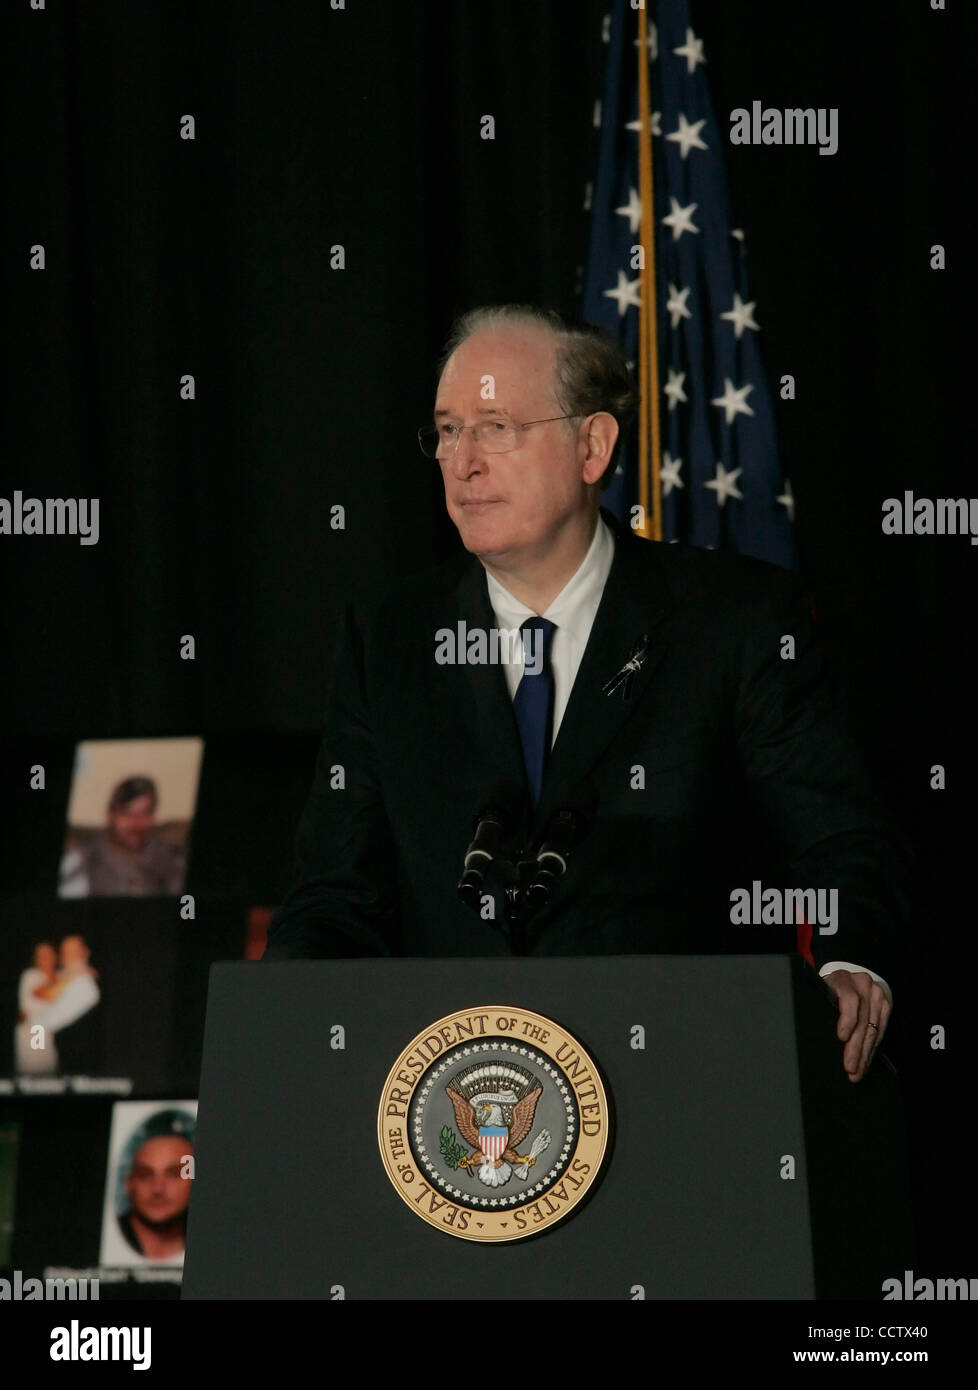 Senator JAY ROCKEFELLER speaks during a memorial service honoring the fallen Upper Big Branch miners. The president and vice president were among those who spoke at the service honoring 29 coal miners who died in an April 5 explosion at Massey Energy's Upper Big Branch Mine near Montcoal, West Virgi Stock Photo